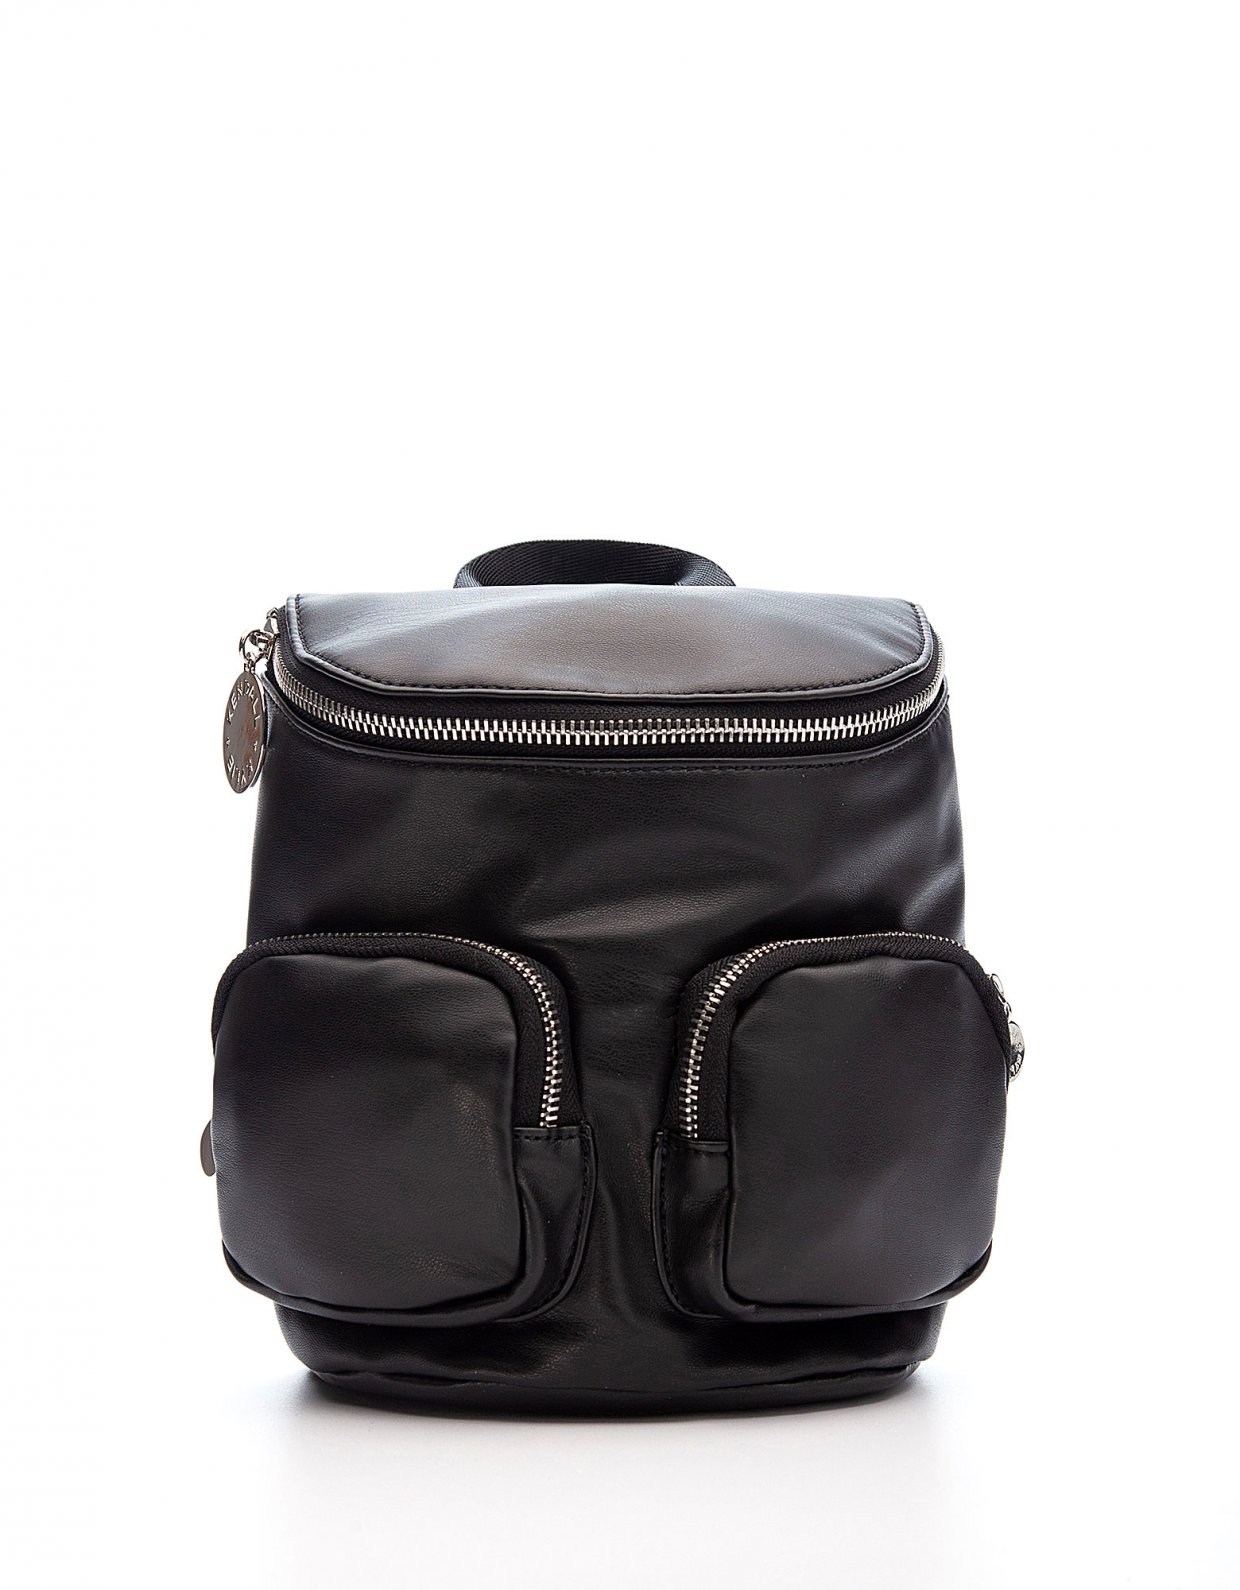 Kendall + Kylie Charlize small backpack black